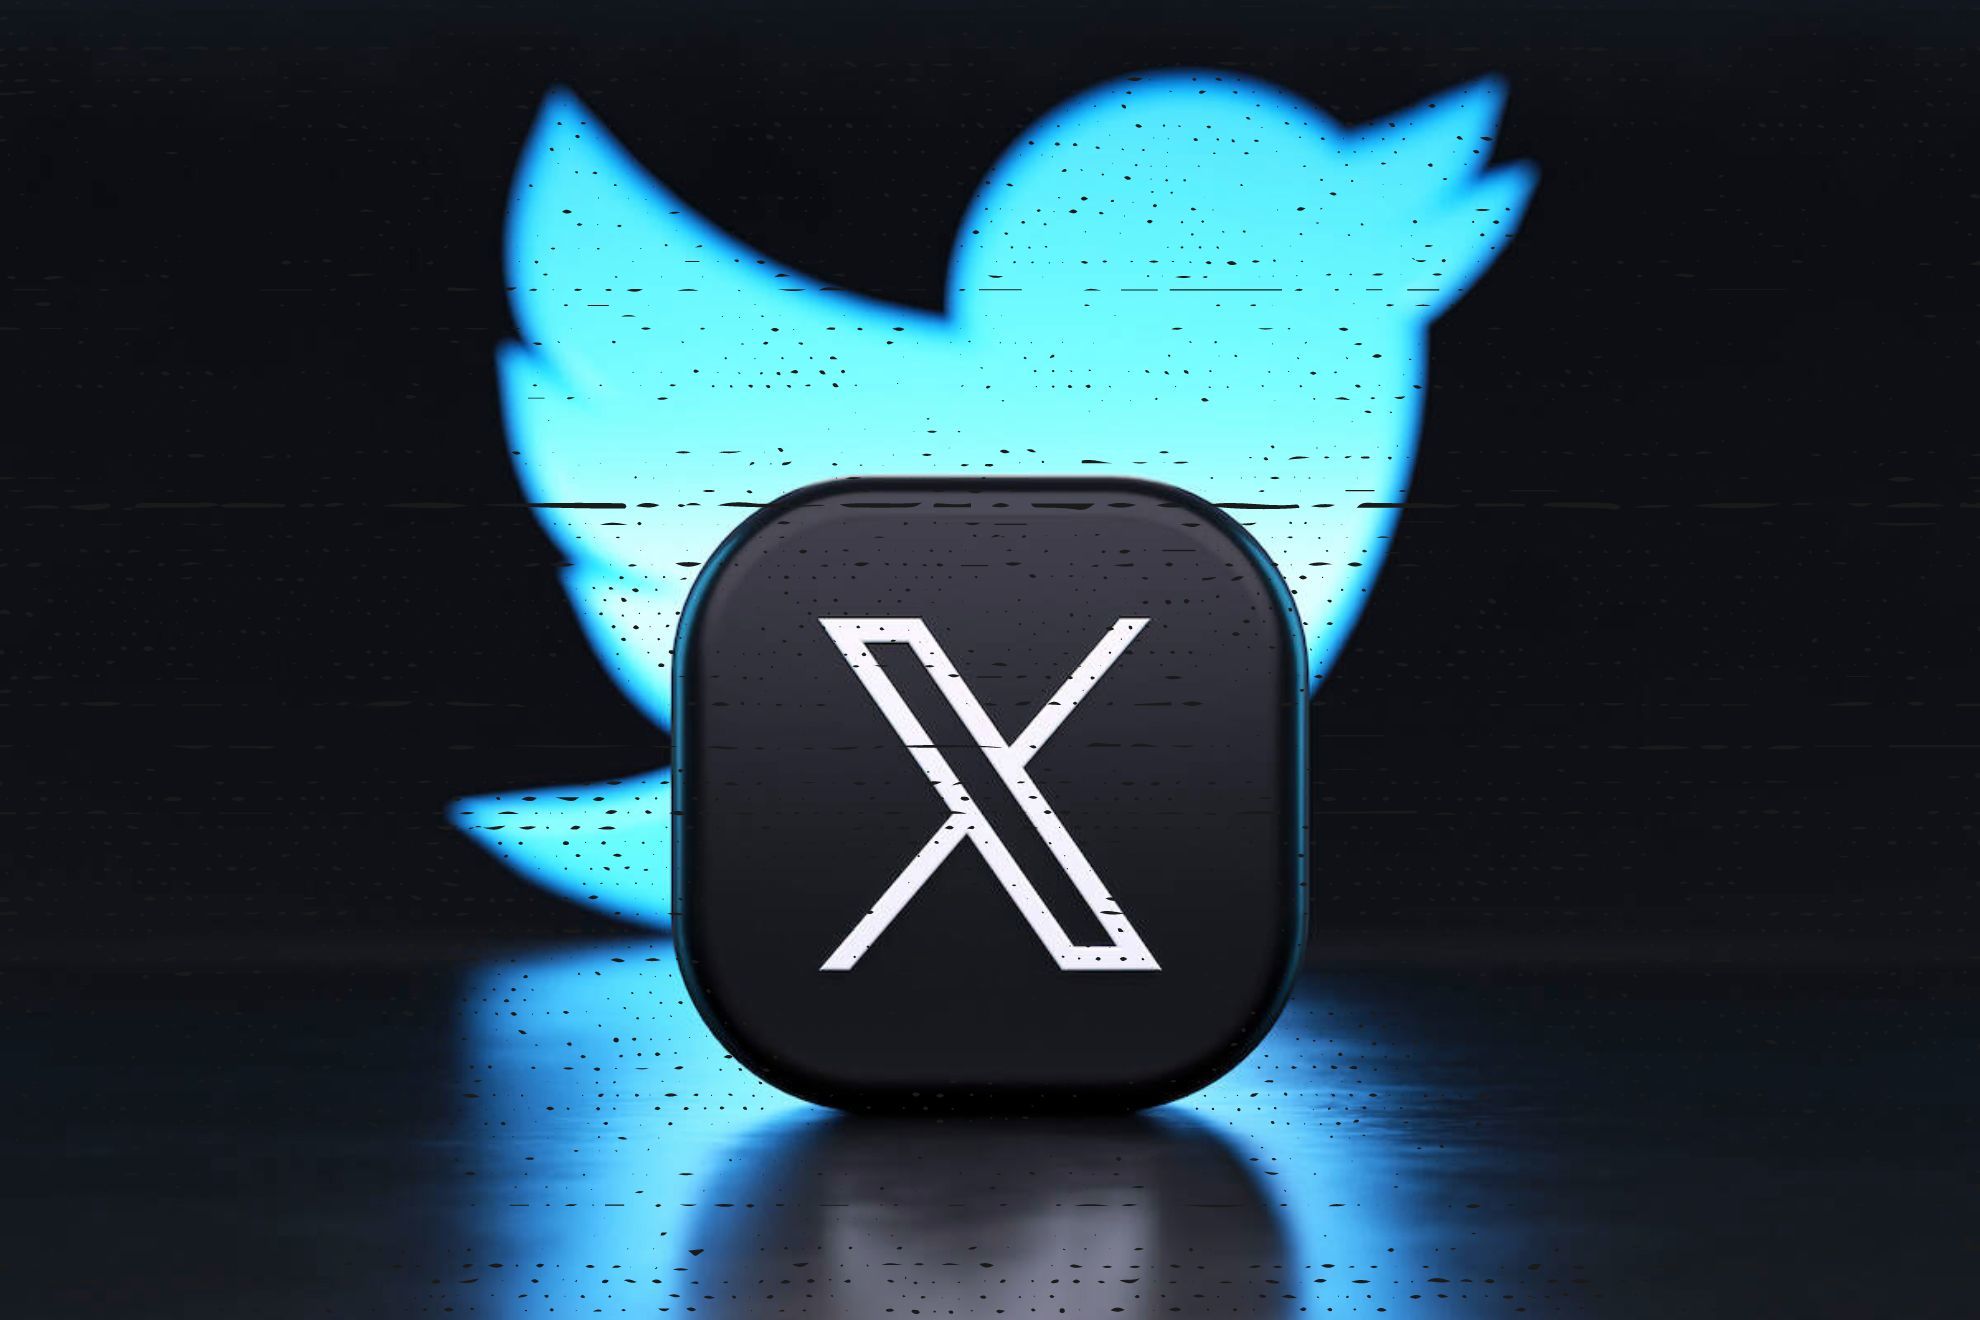 X, formerly known as Twitter, stopped working worldwide on Wednesday night.